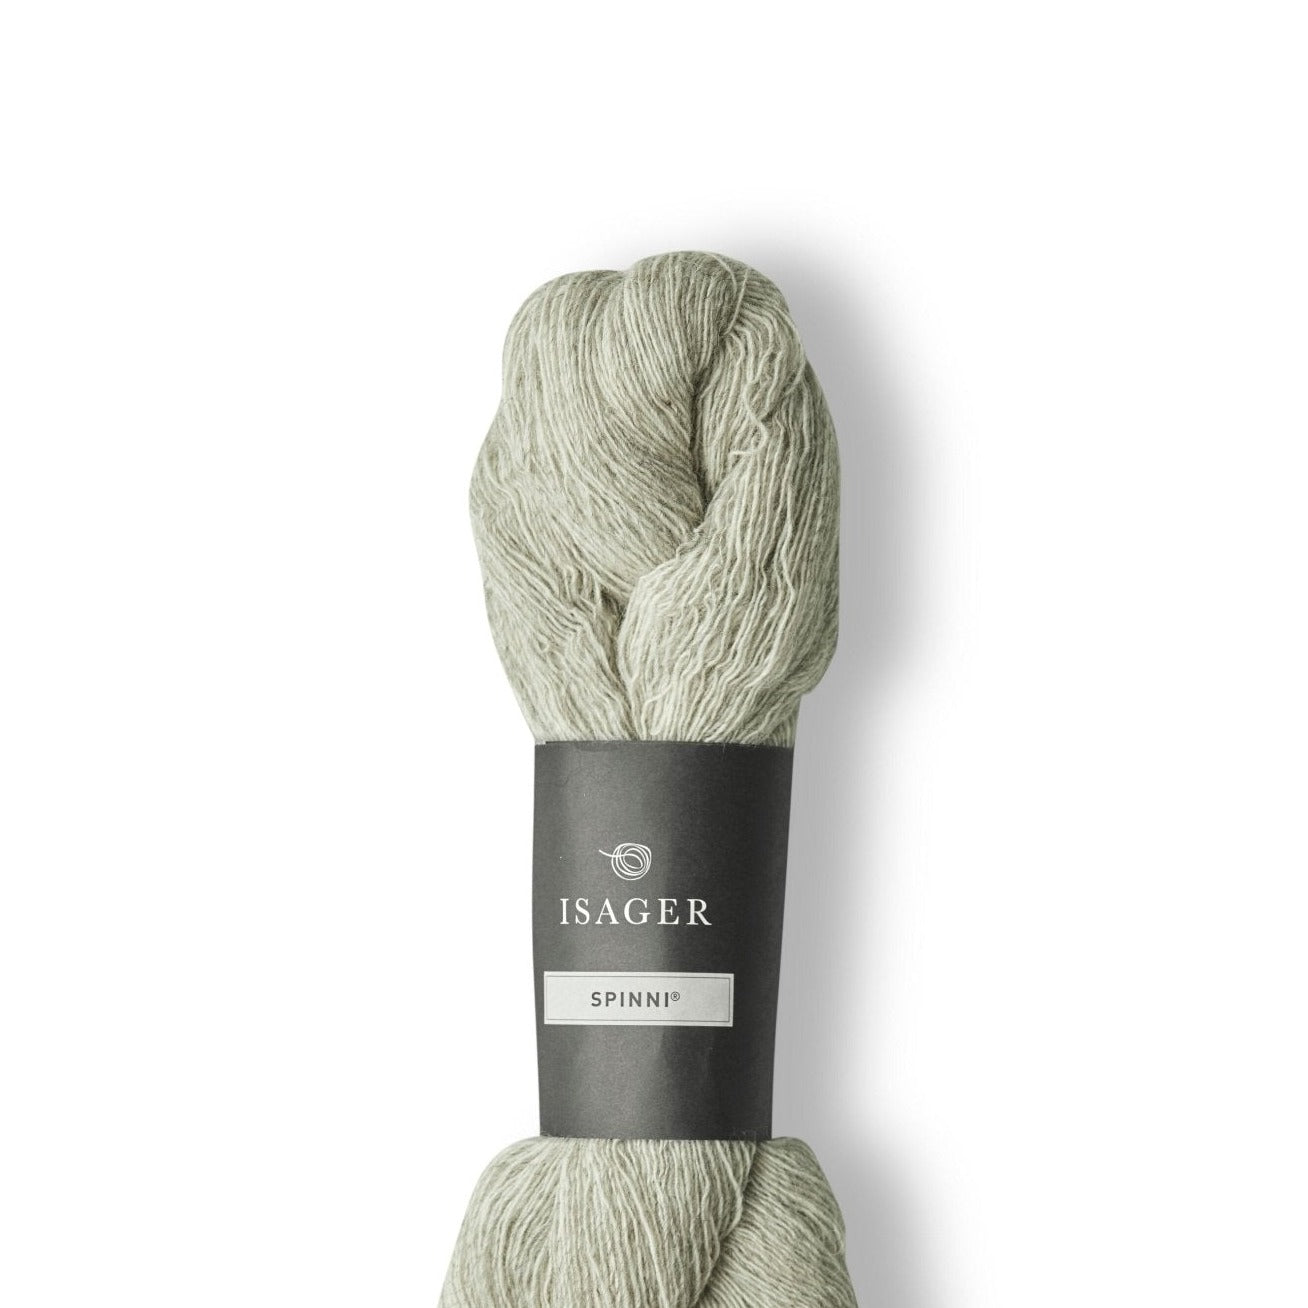 Spinnerin Yarn Deluxe 4 Ply Knitting Worsted Weight 55975 USA